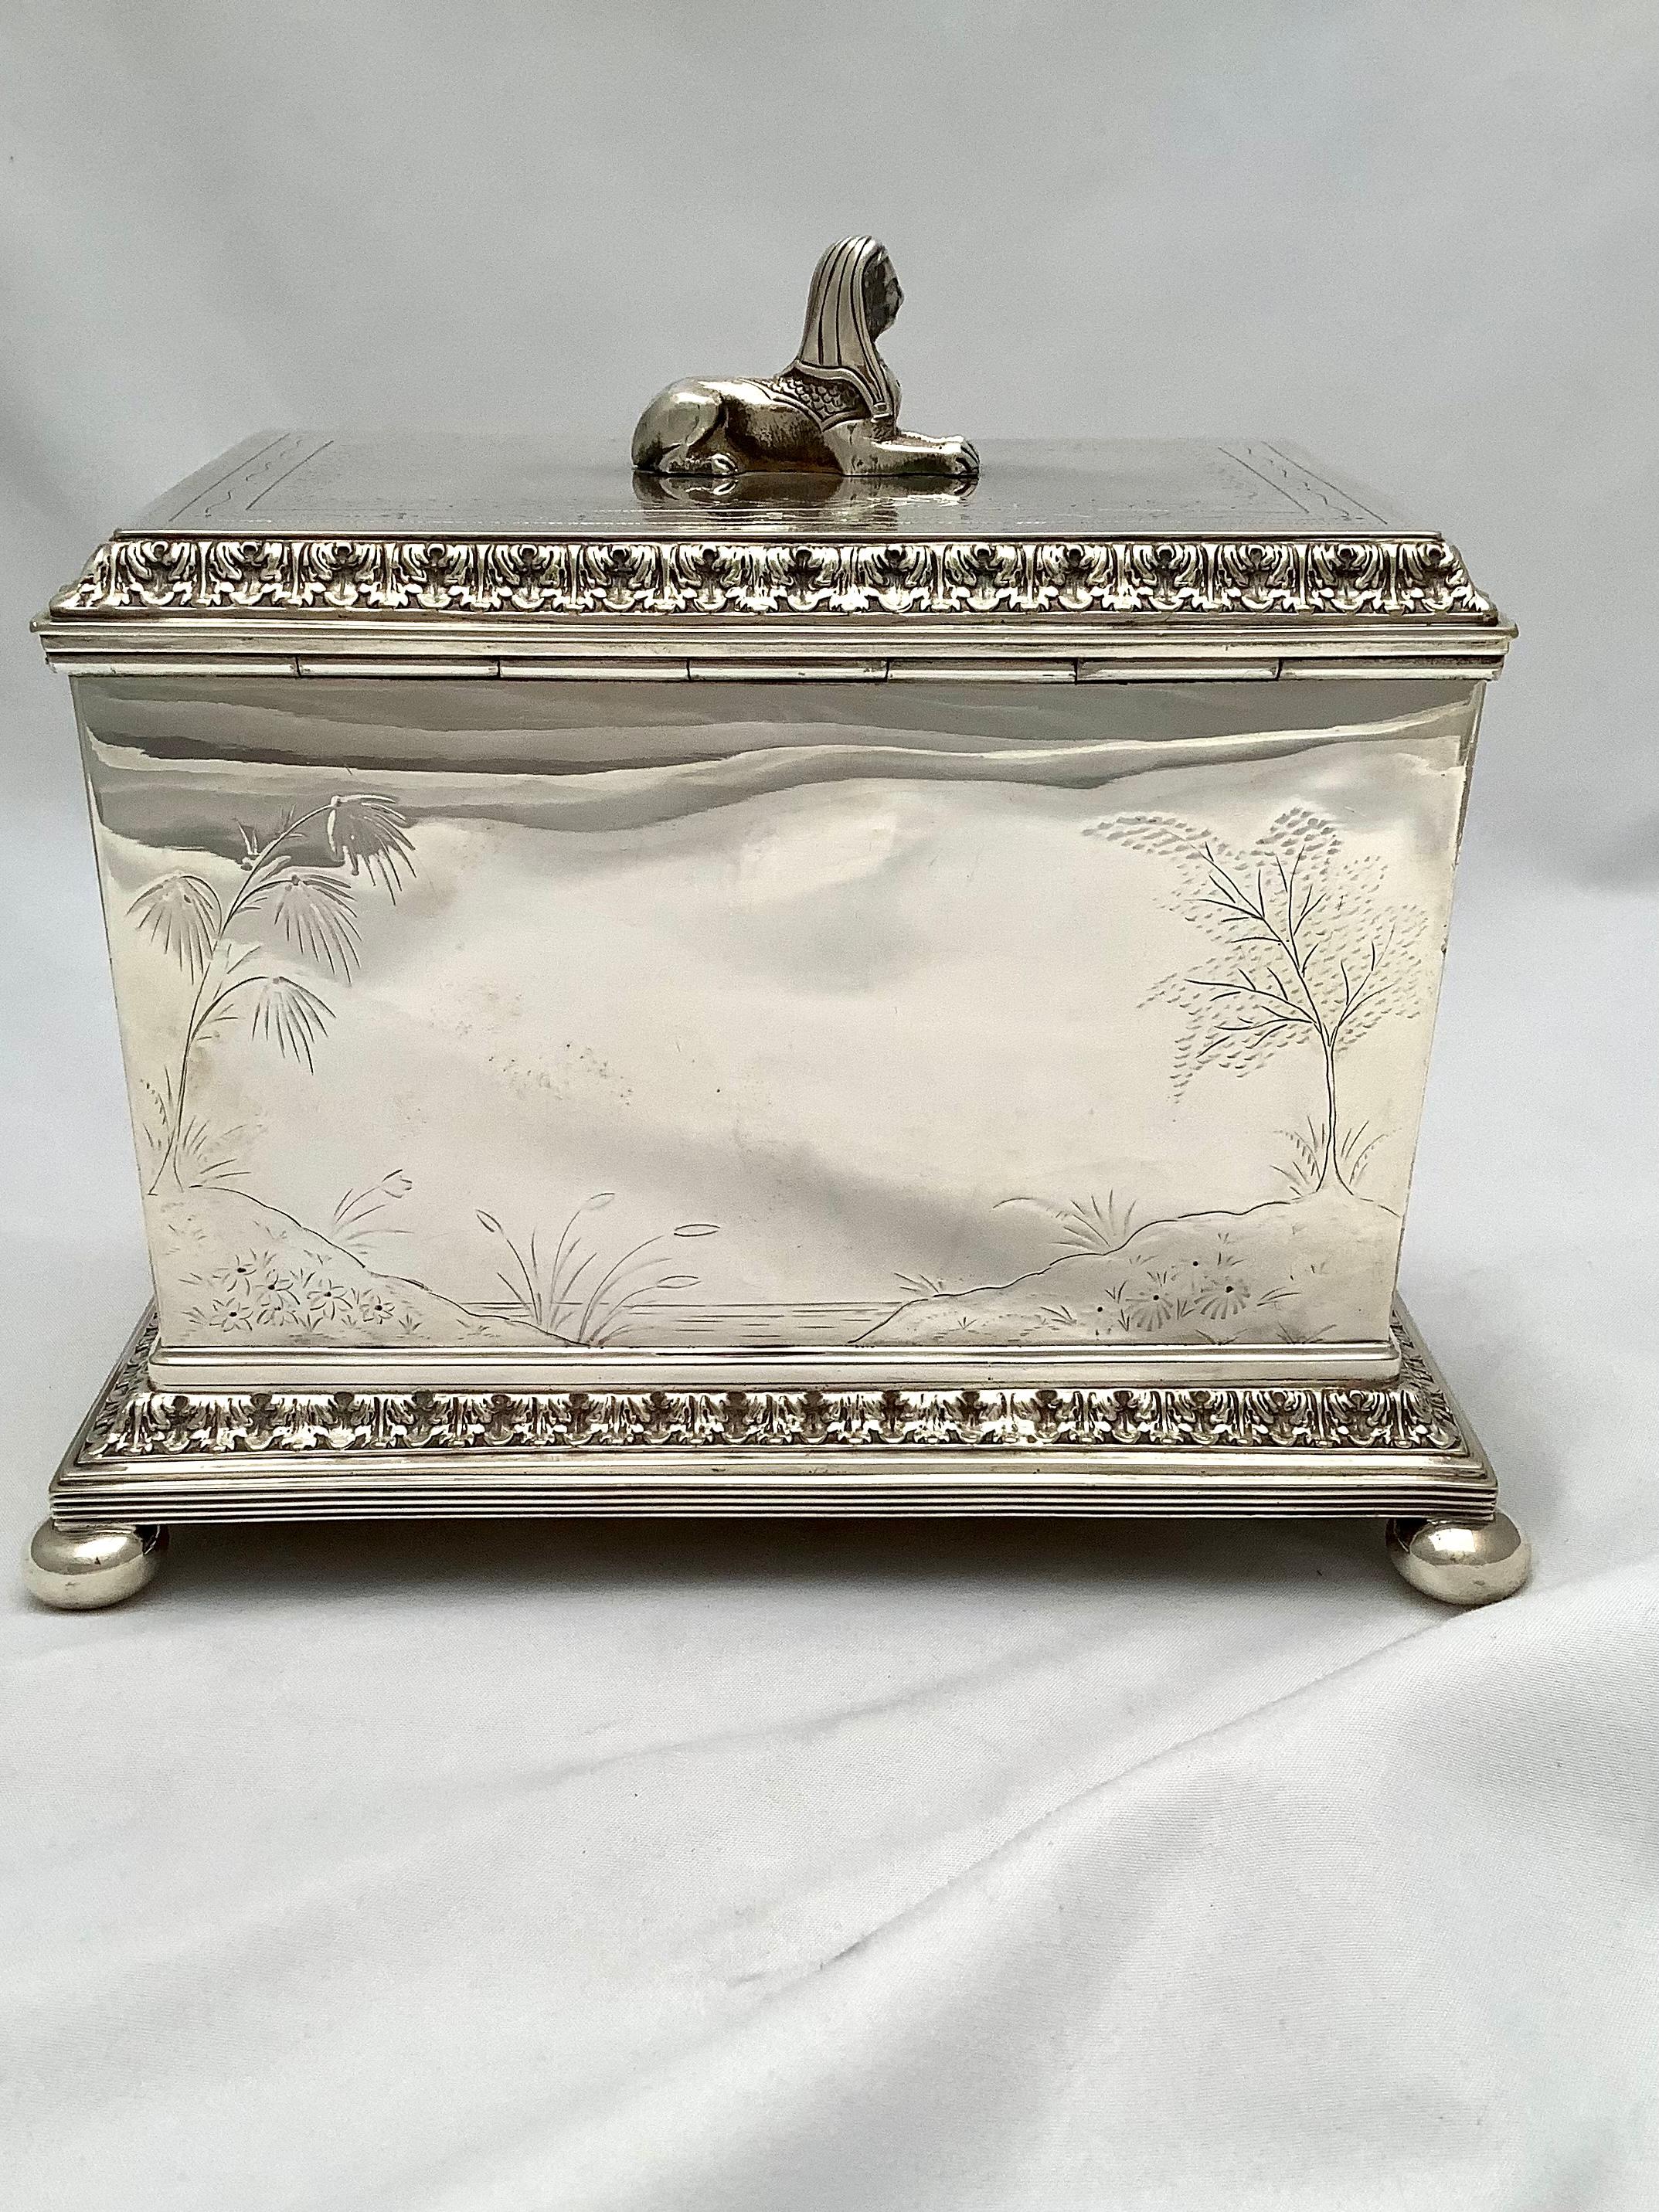 Chinoiserie Silver Box with Asian Decorative Engraving